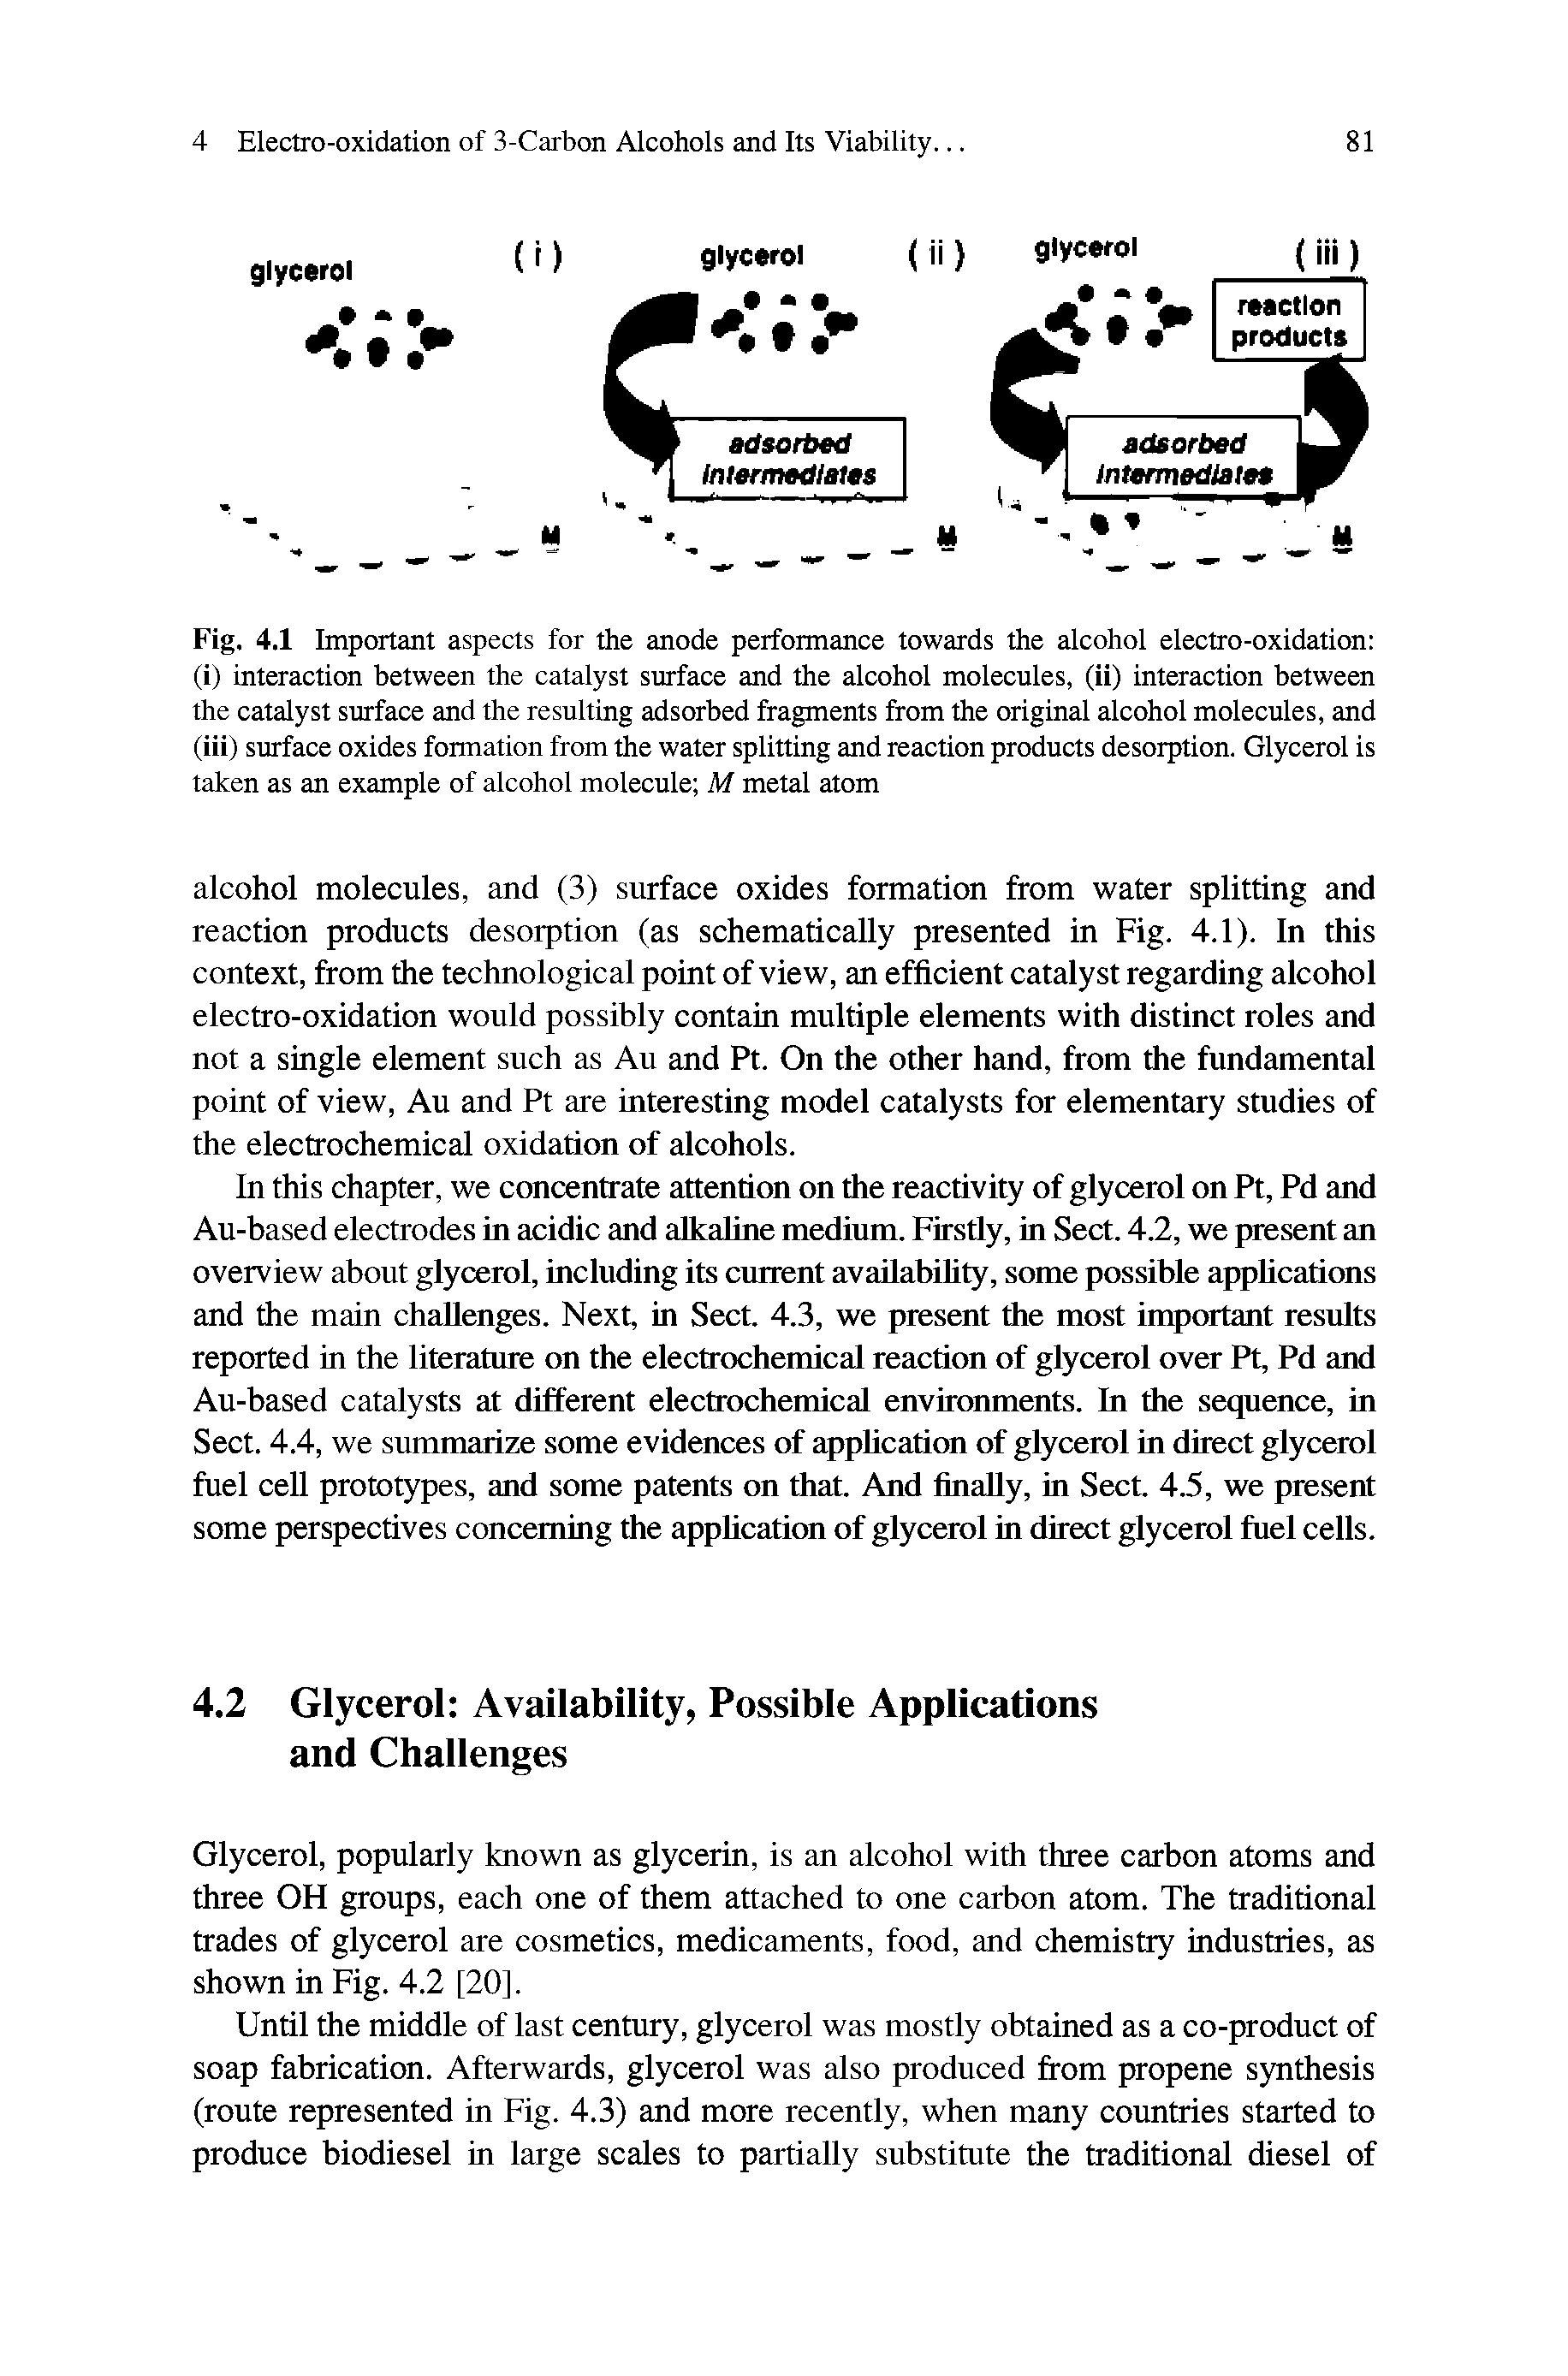 Fig. 4.1 Important aspects for the anode performance towards the alcohol electro-oxidation (i) interaction between the catalyst surface and the alcohol molecules, (ii) interaction between the catalyst surface and the resulting adsorbed fragments from the original alcohol molecules, and (iii) surface oxides formation from the water splitting and reaction products desorption. Glycerol is taken as an example of alcohol molecule M metal atom...